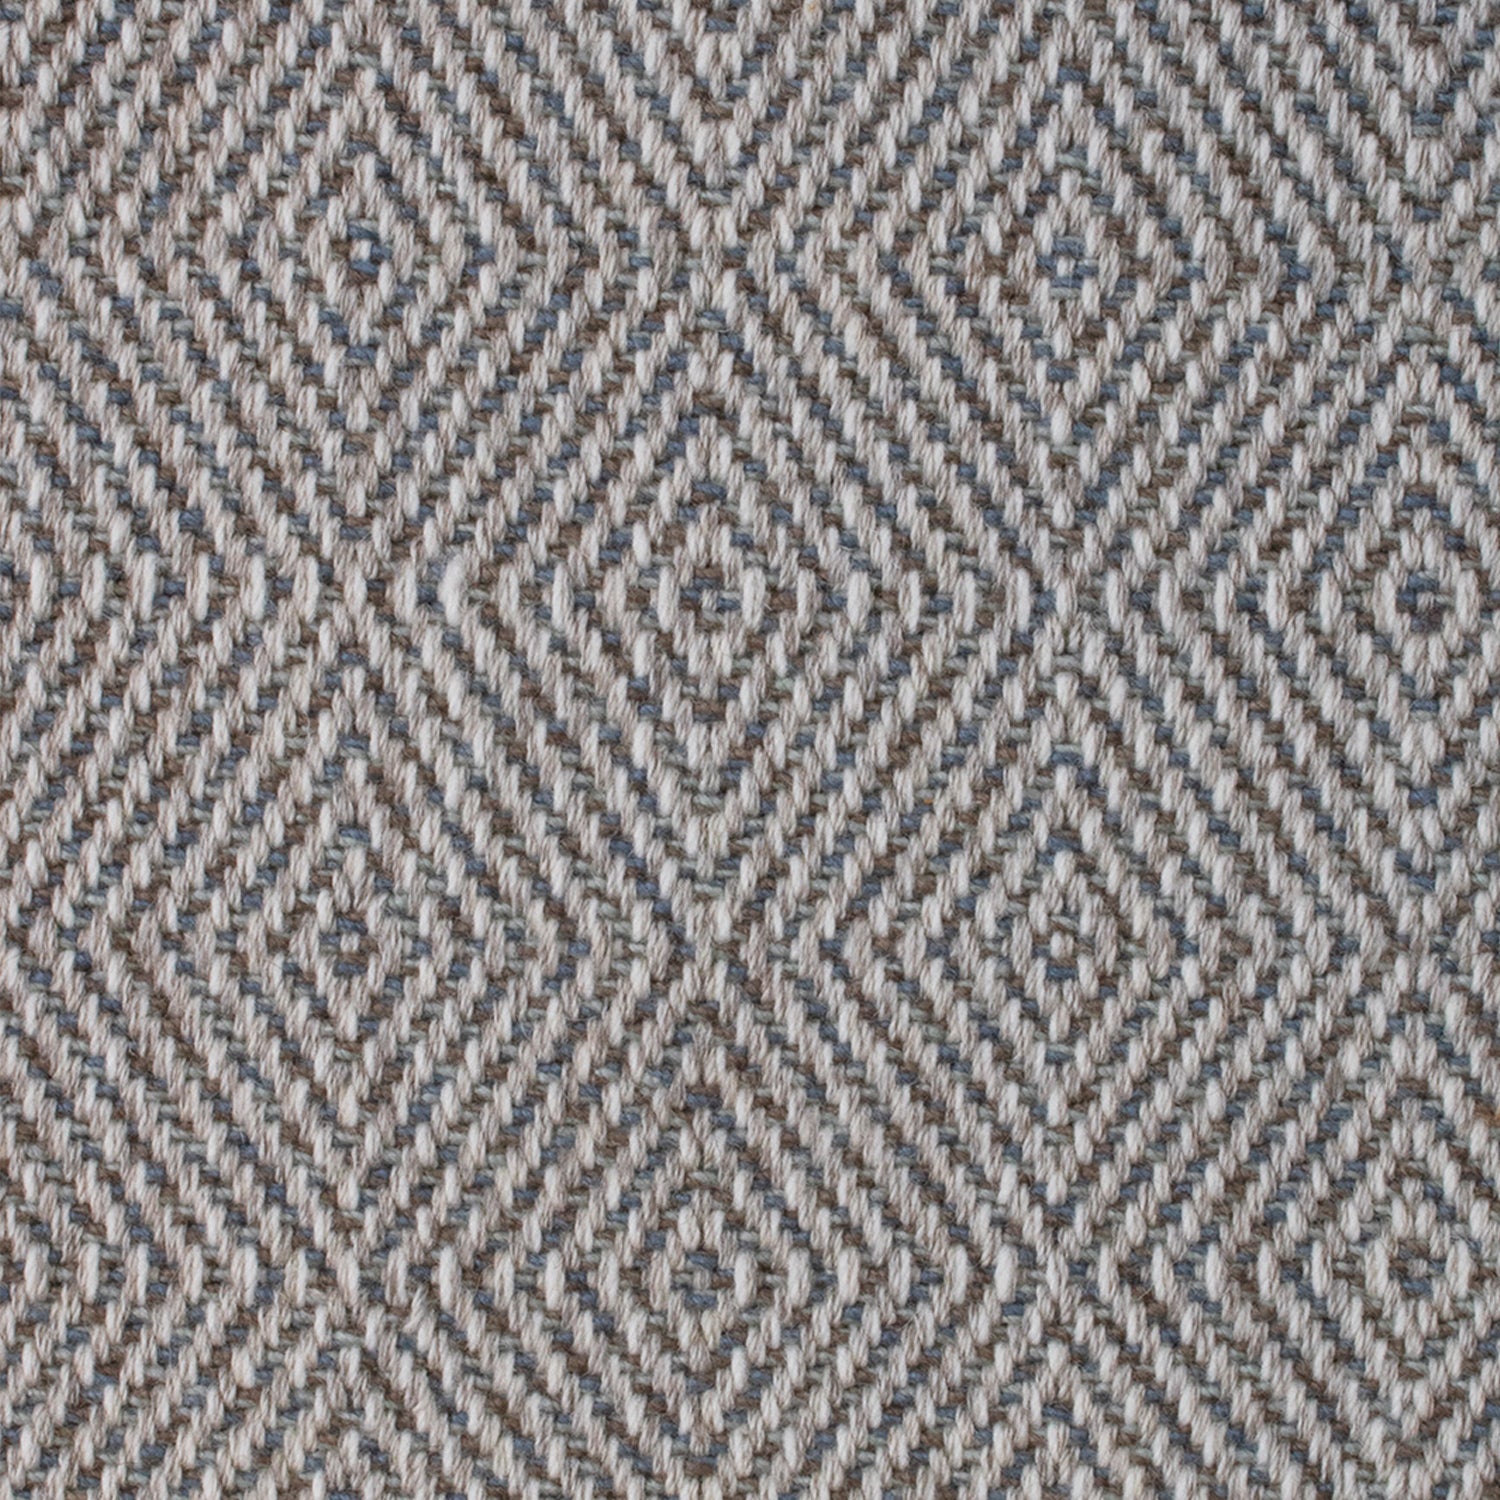 Wool-blend broadloom carpet swatch in a chunky diamond weave in mottled shades of brown, cream and navy.